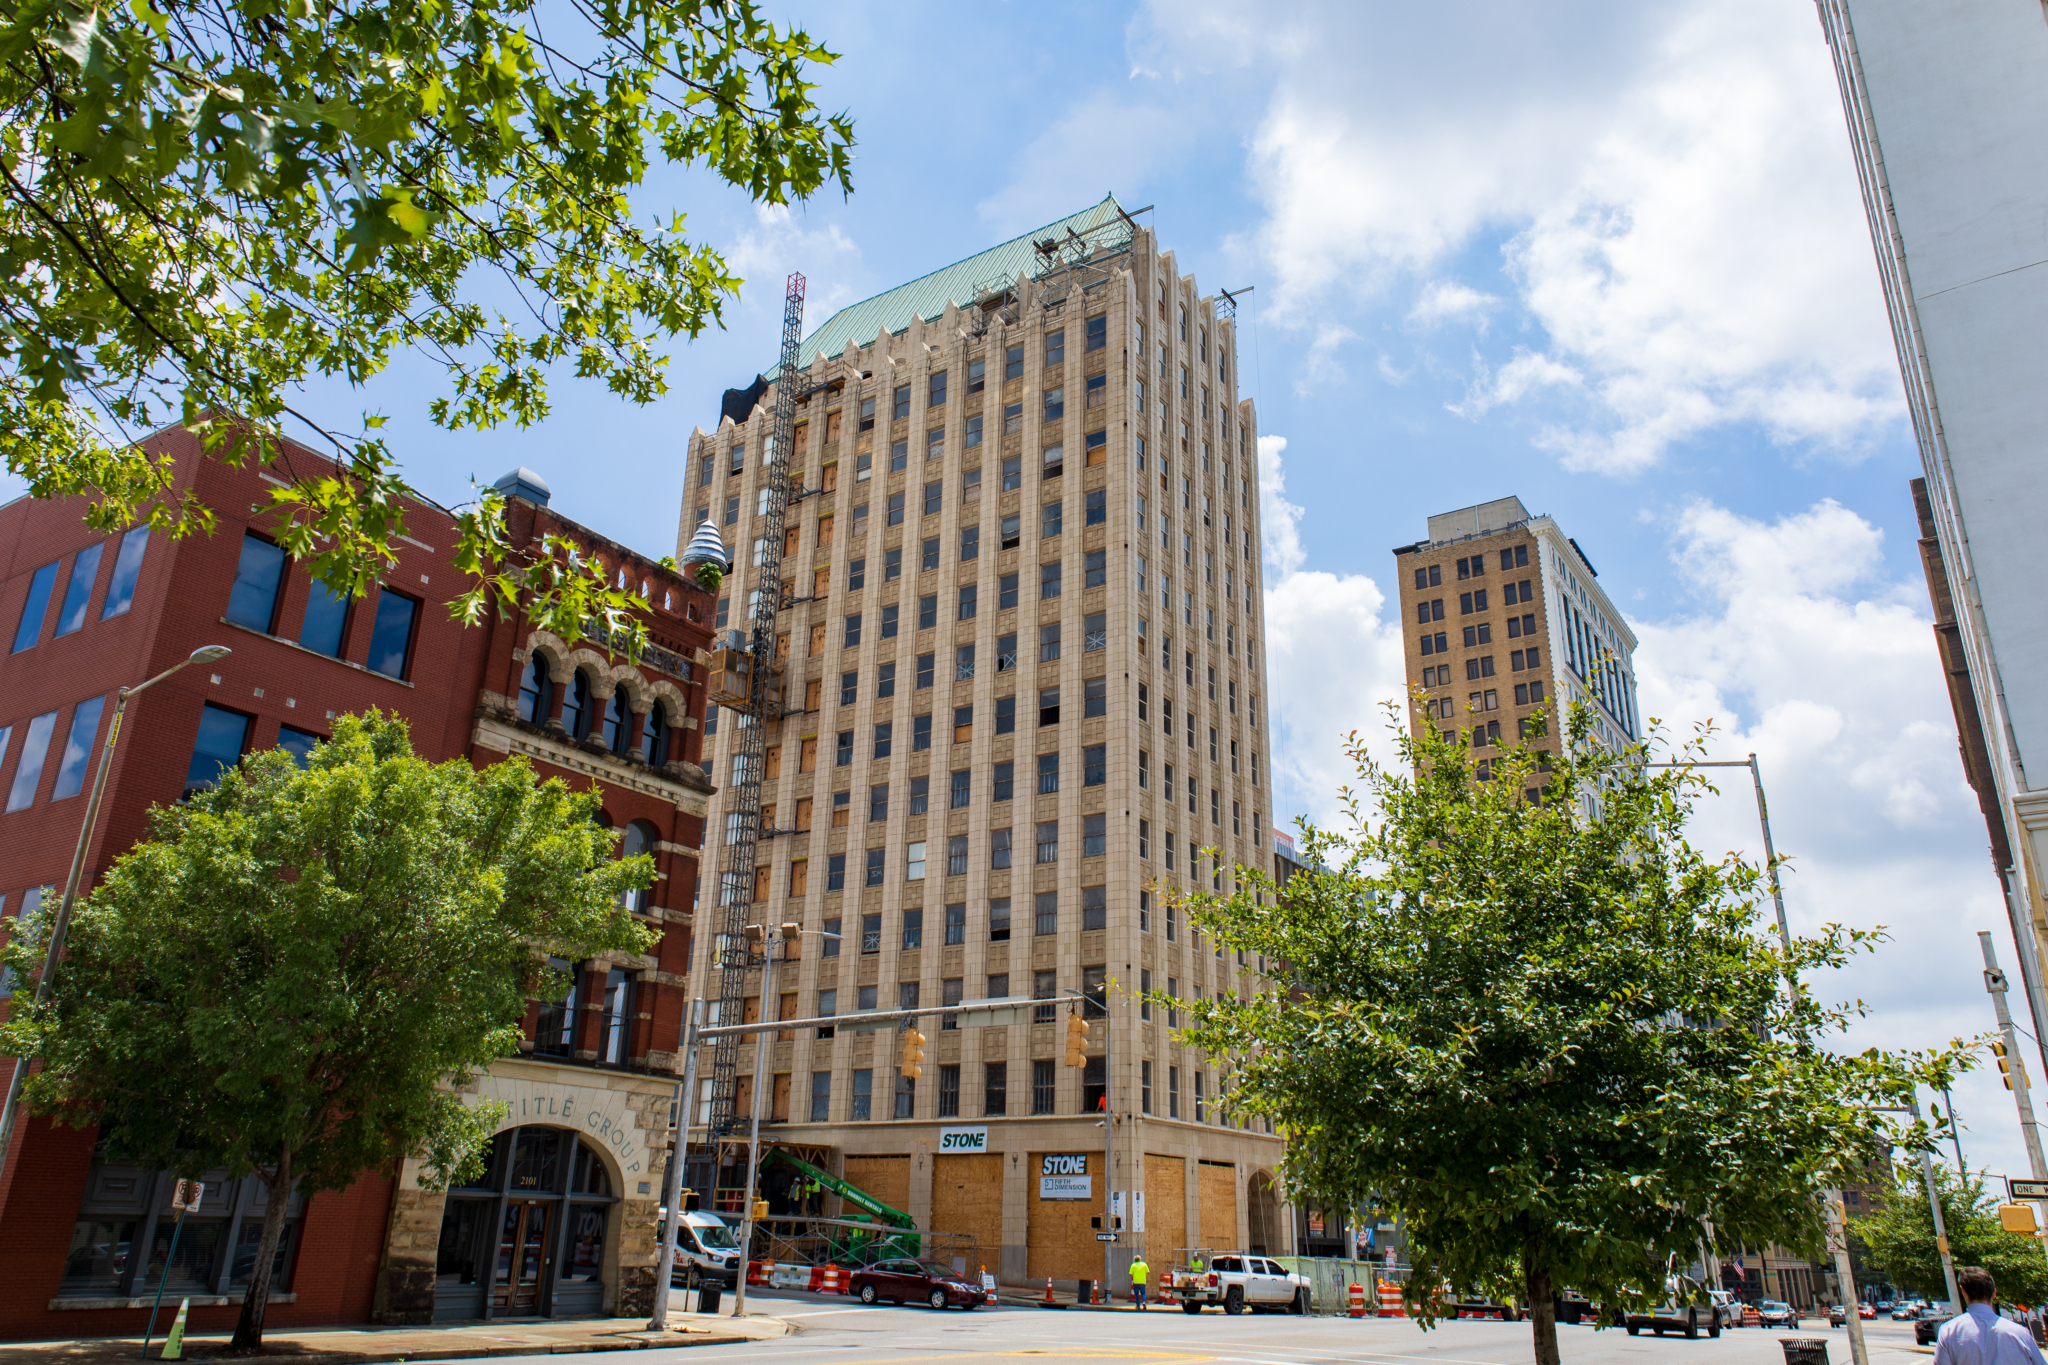 protectivelife 5490 Upcoming Kelly Hotel in historic Birmingham building set to open Spring 2021